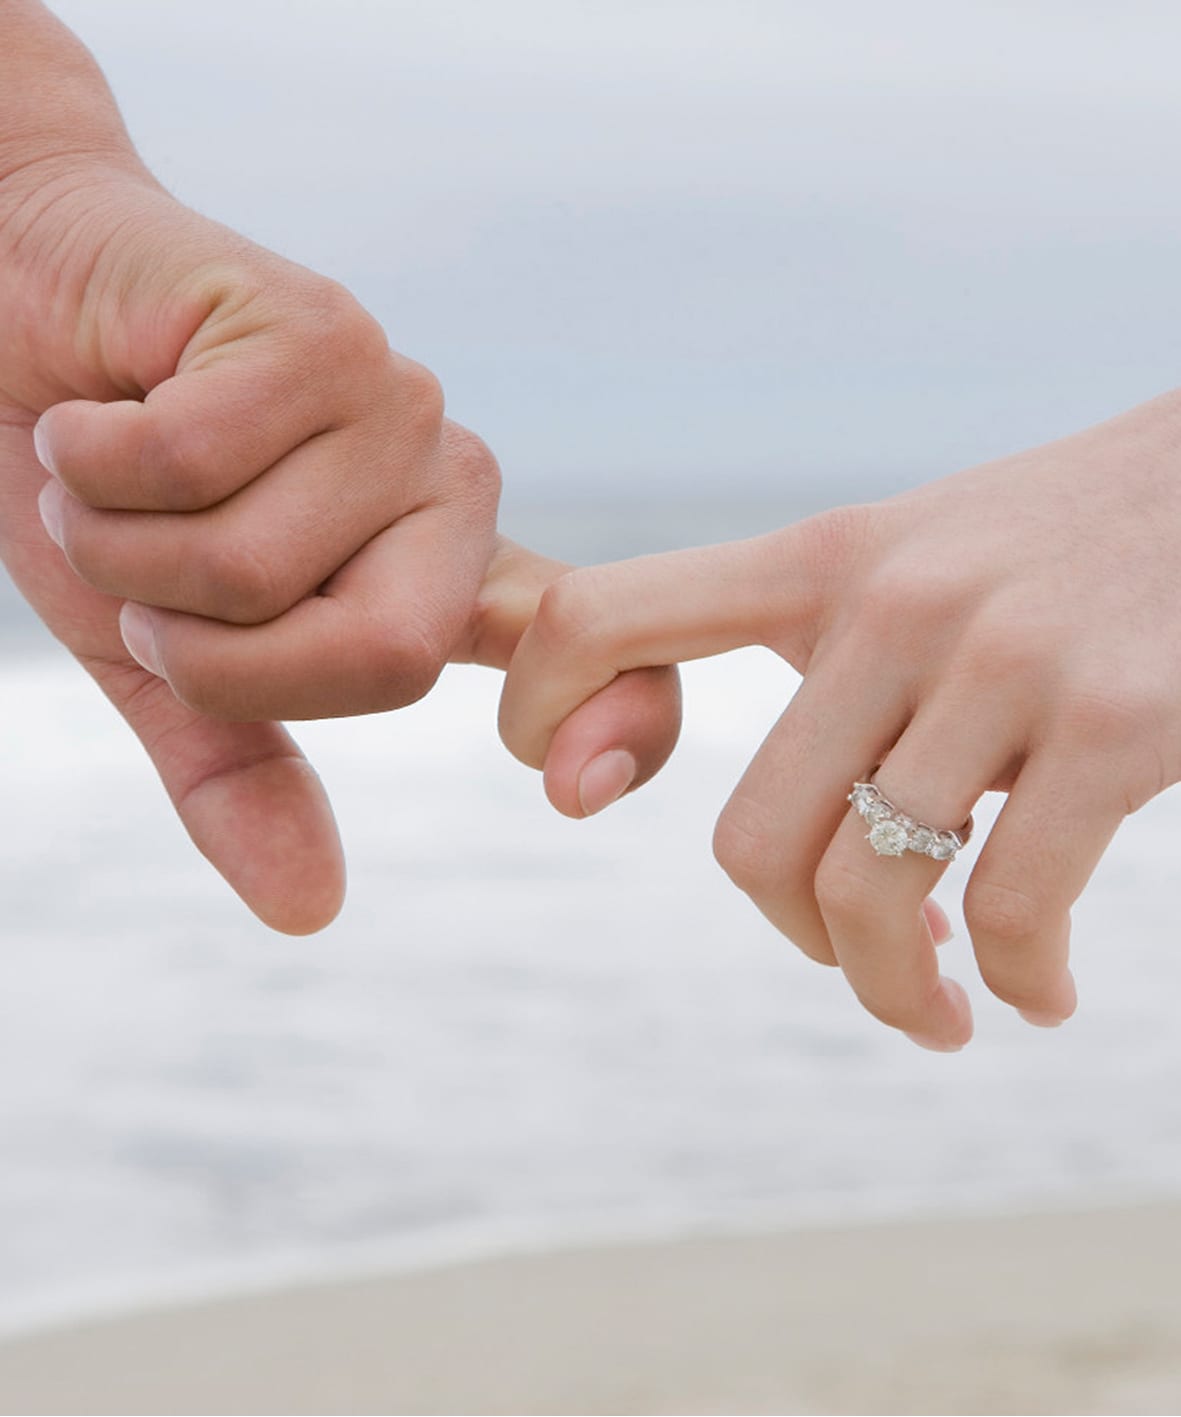 Should You Choose Your Fiancée’s Engagement Ring Without Her?